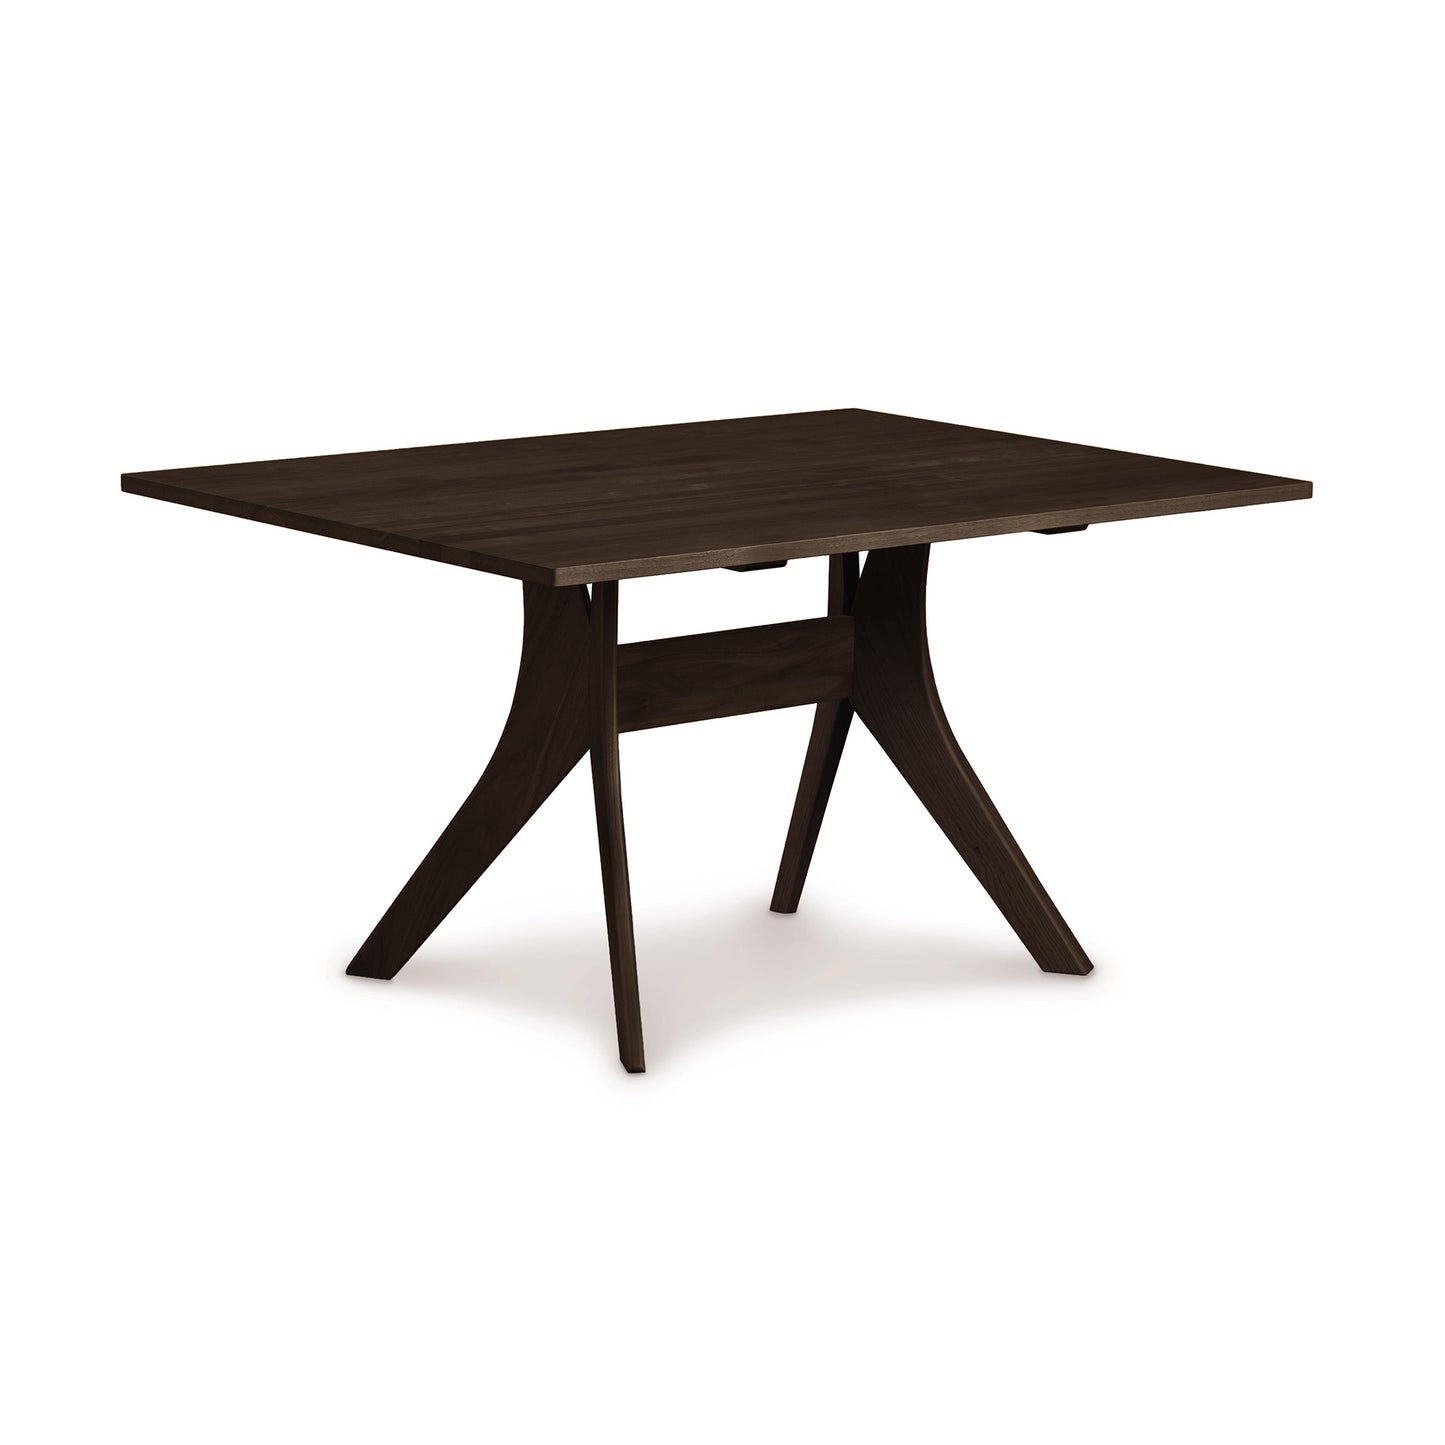 A Copeland Furniture Audrey Solid Top Dining Table with a wooden base, crafted from solid hardwood.